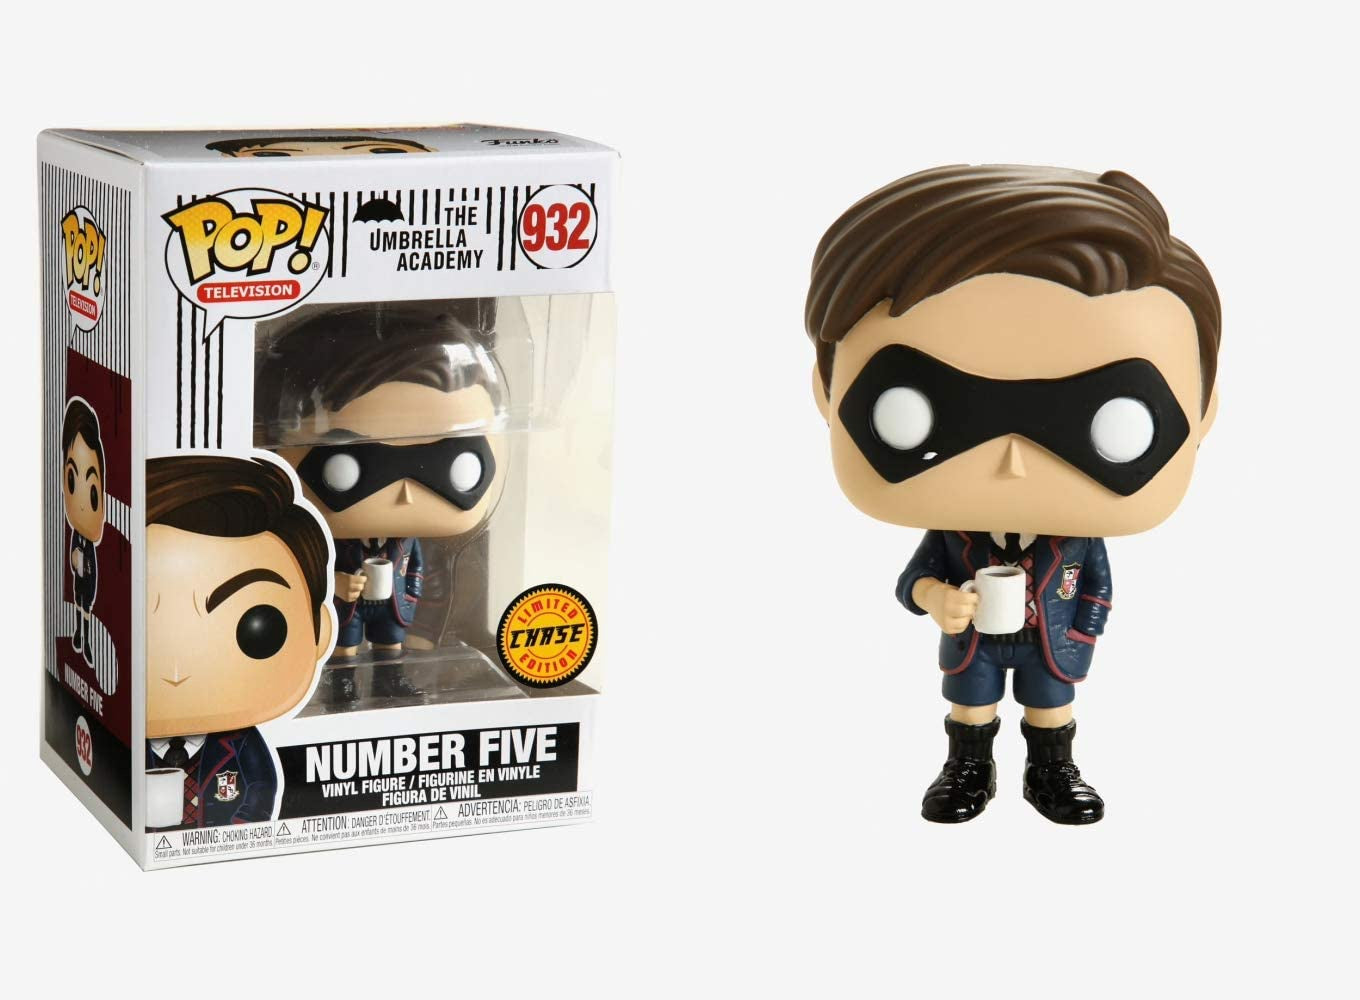 Number Five Chase Funko Pop